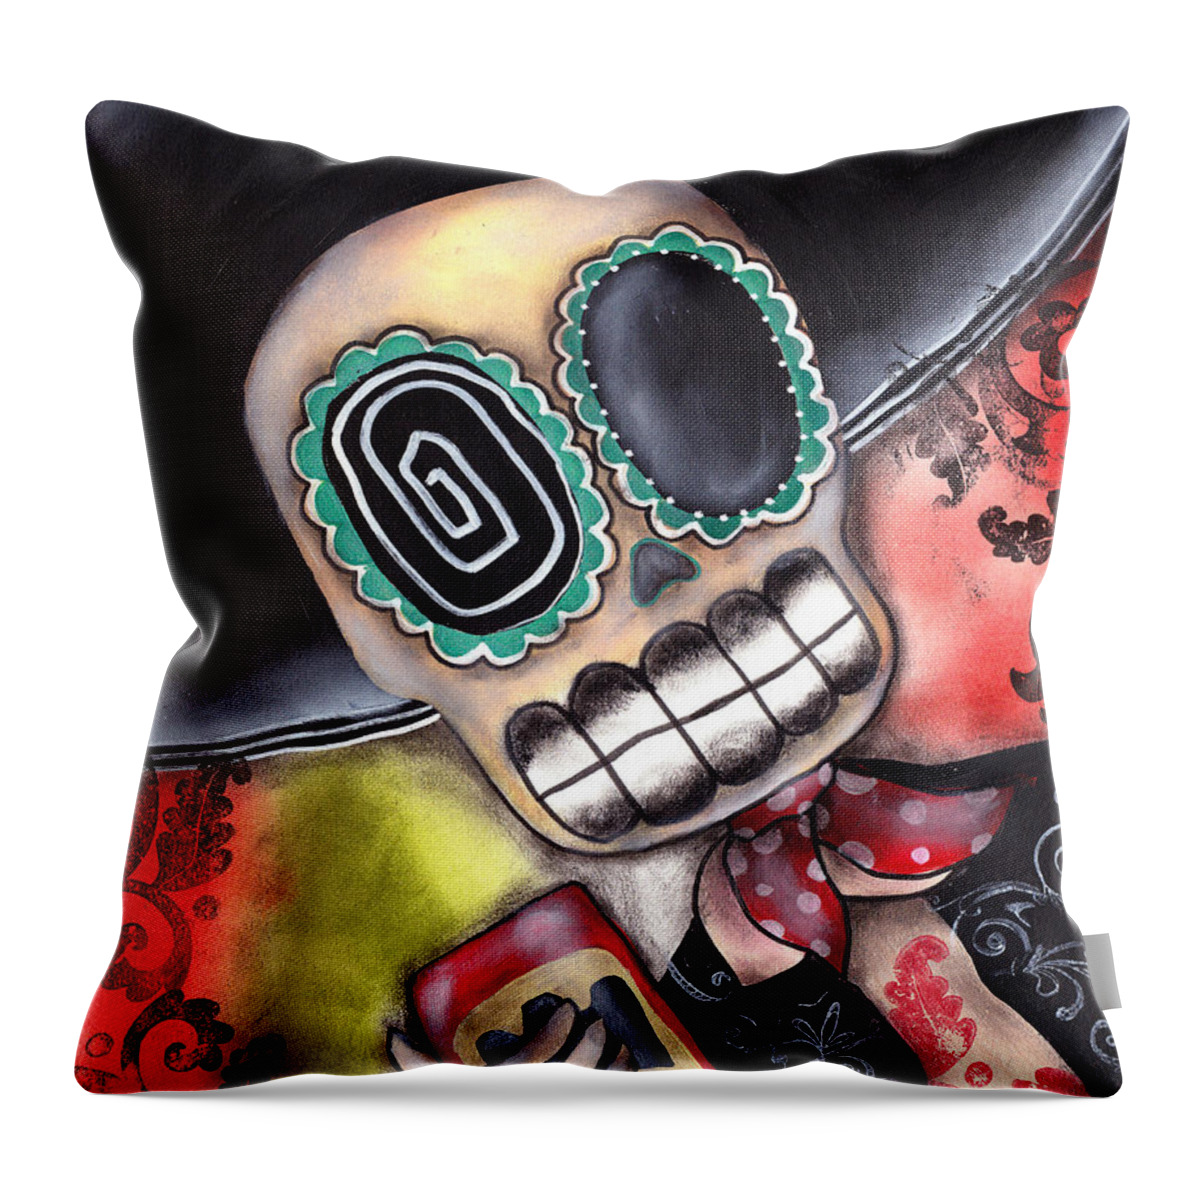 Mariachi Throw Pillow featuring the painting Martin Mariachi by Abril Andrade